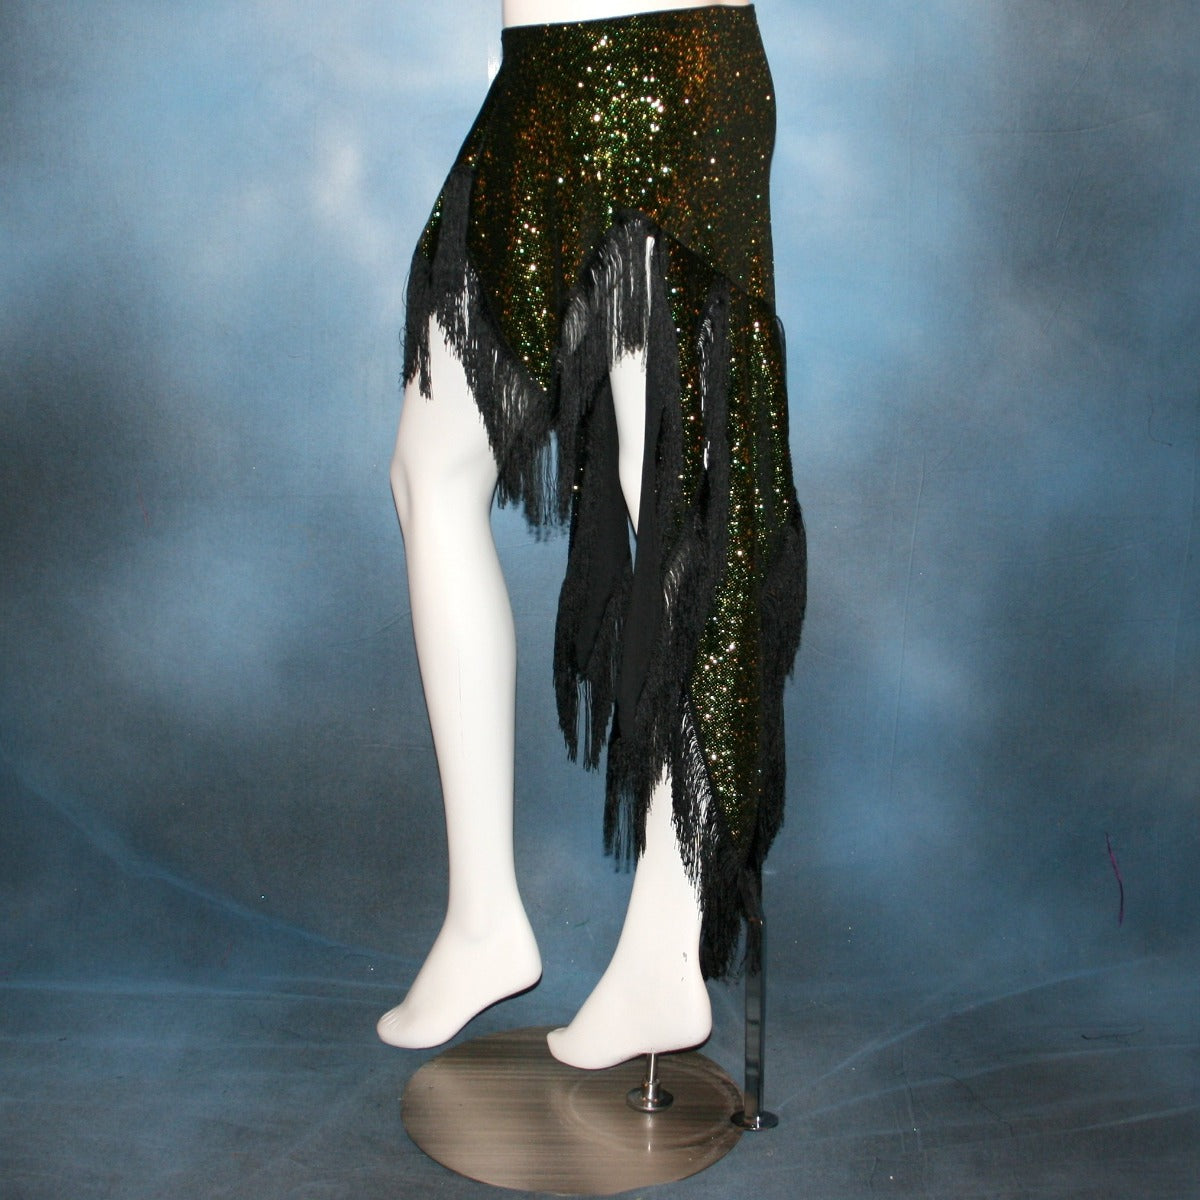 Crystal's Creations side view of green Latin fringy skirt created of luxurious green glitter slinky